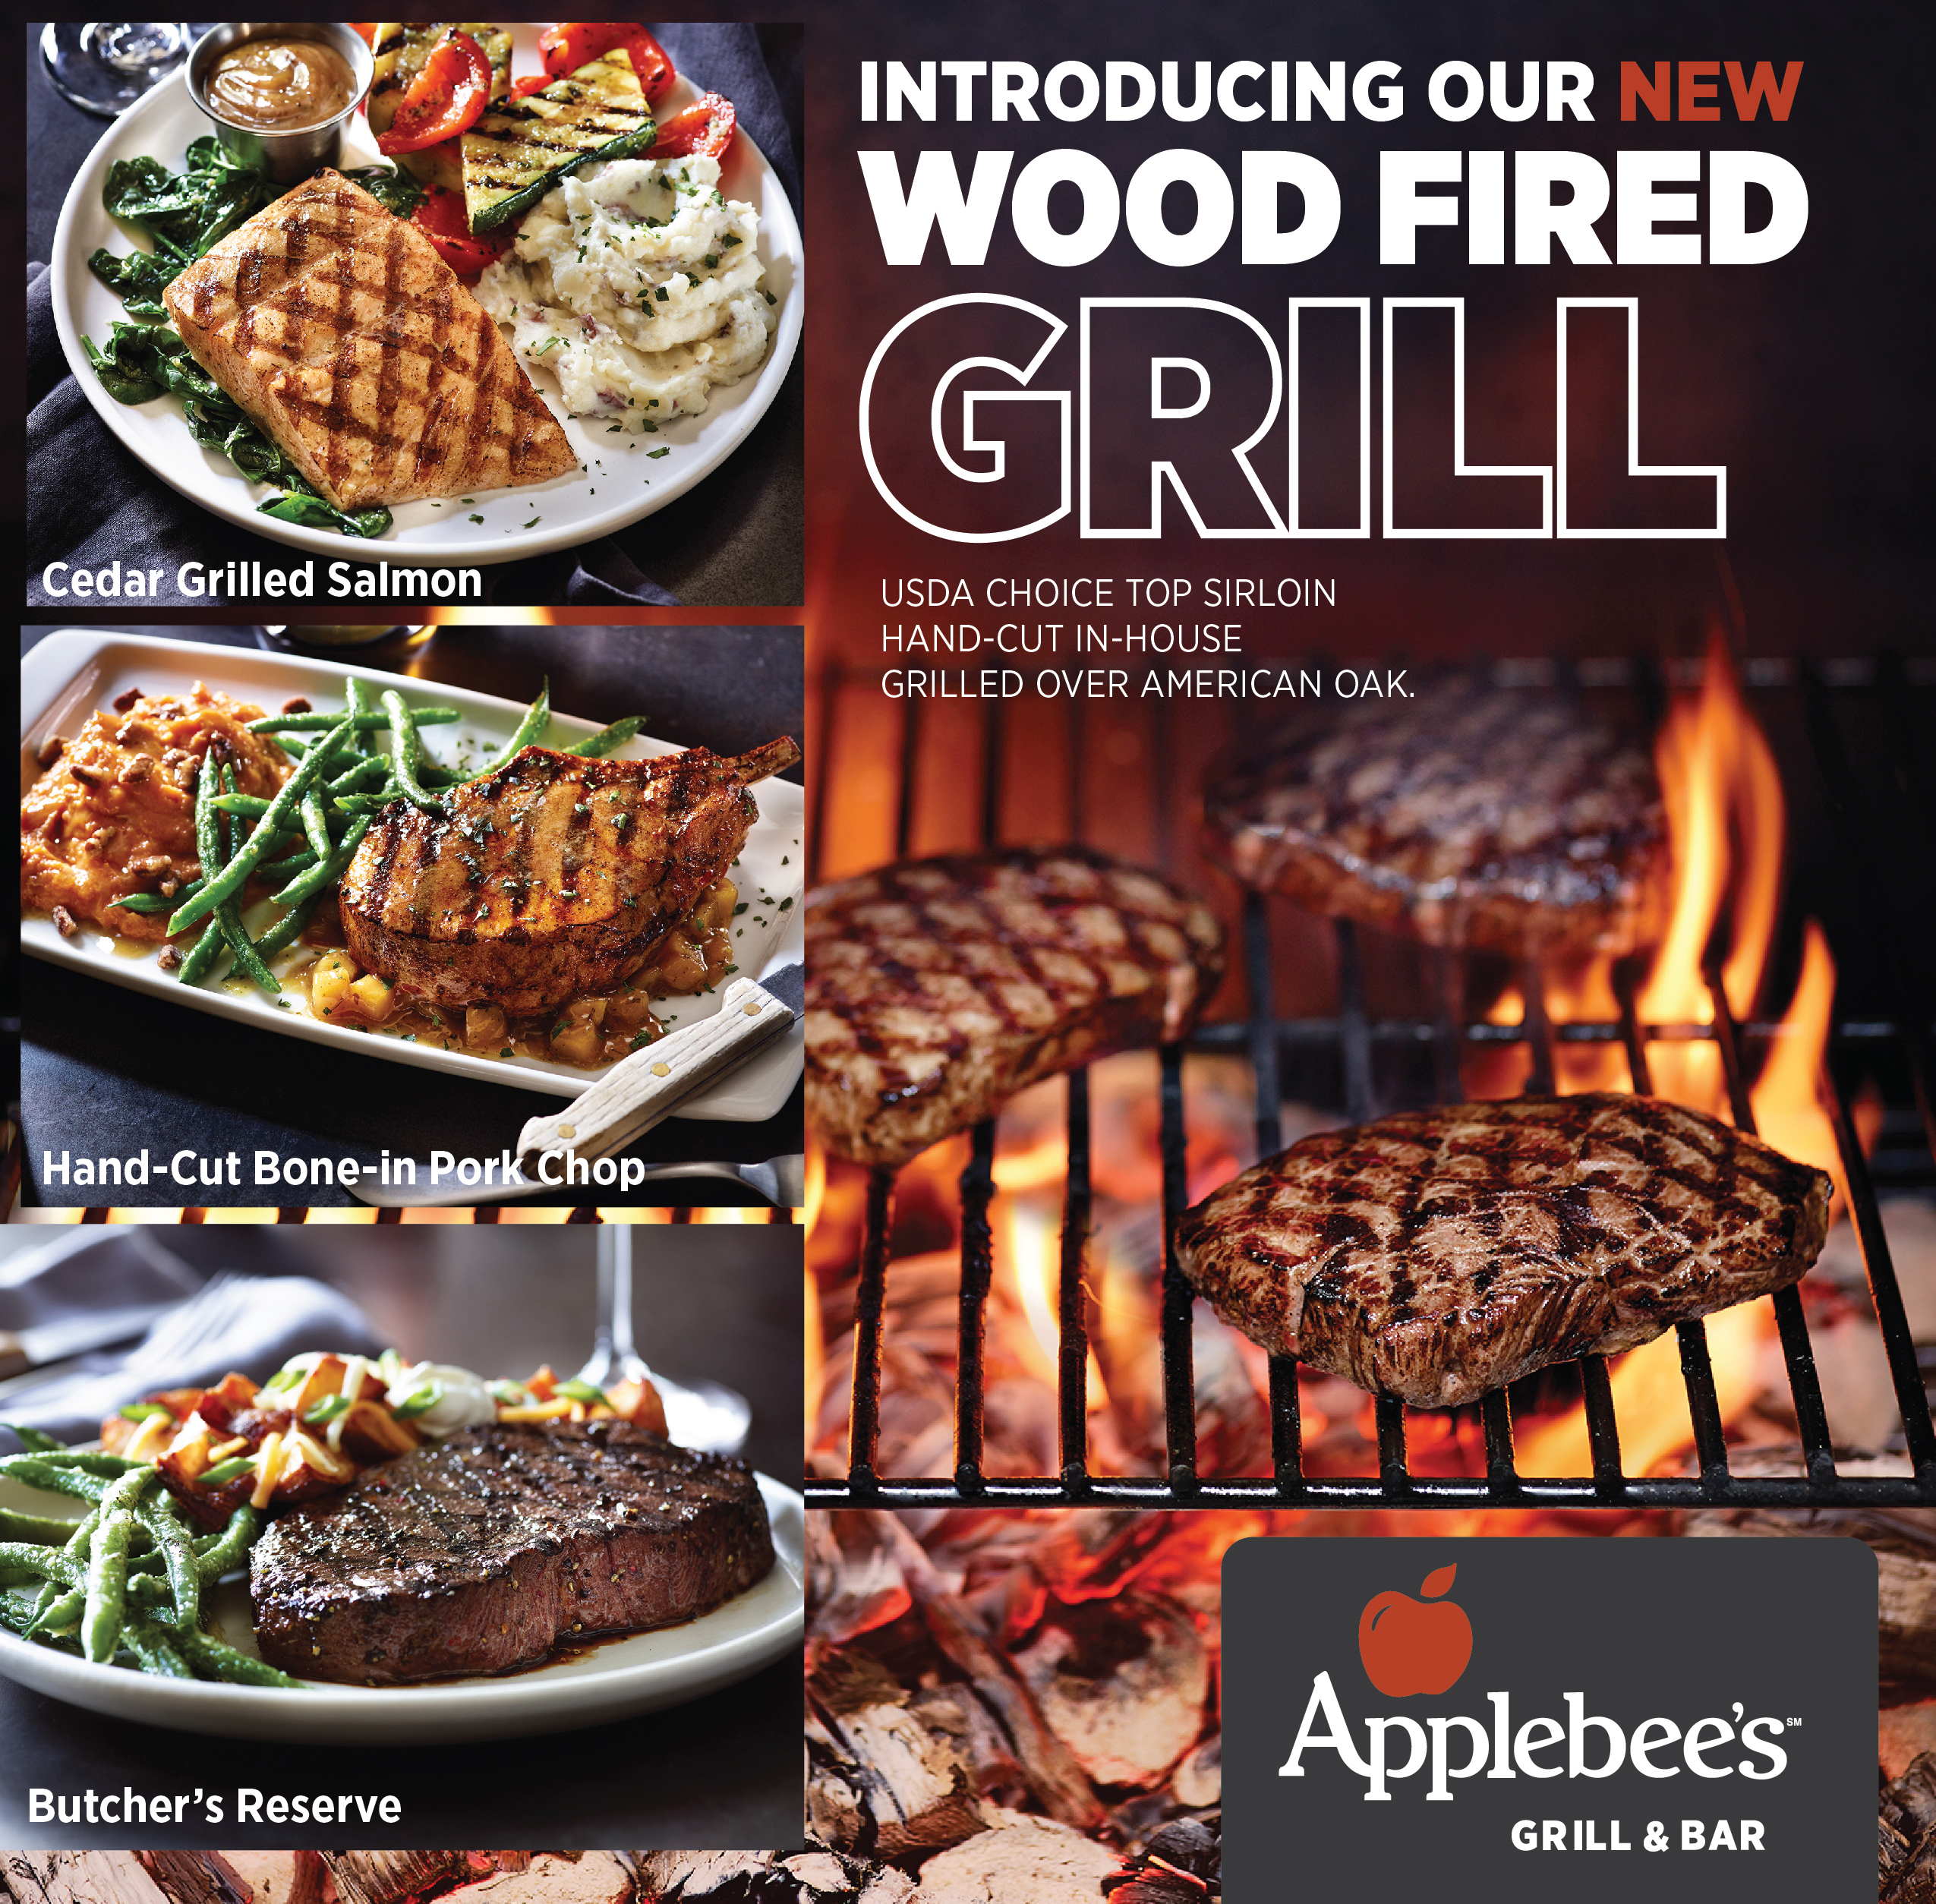 North Platte, NE area Applebee’s introduce new Hand-Cut Wood Fired offerings including USDA Choice Top Sirloin Steaks and Bone-in Pork Chops